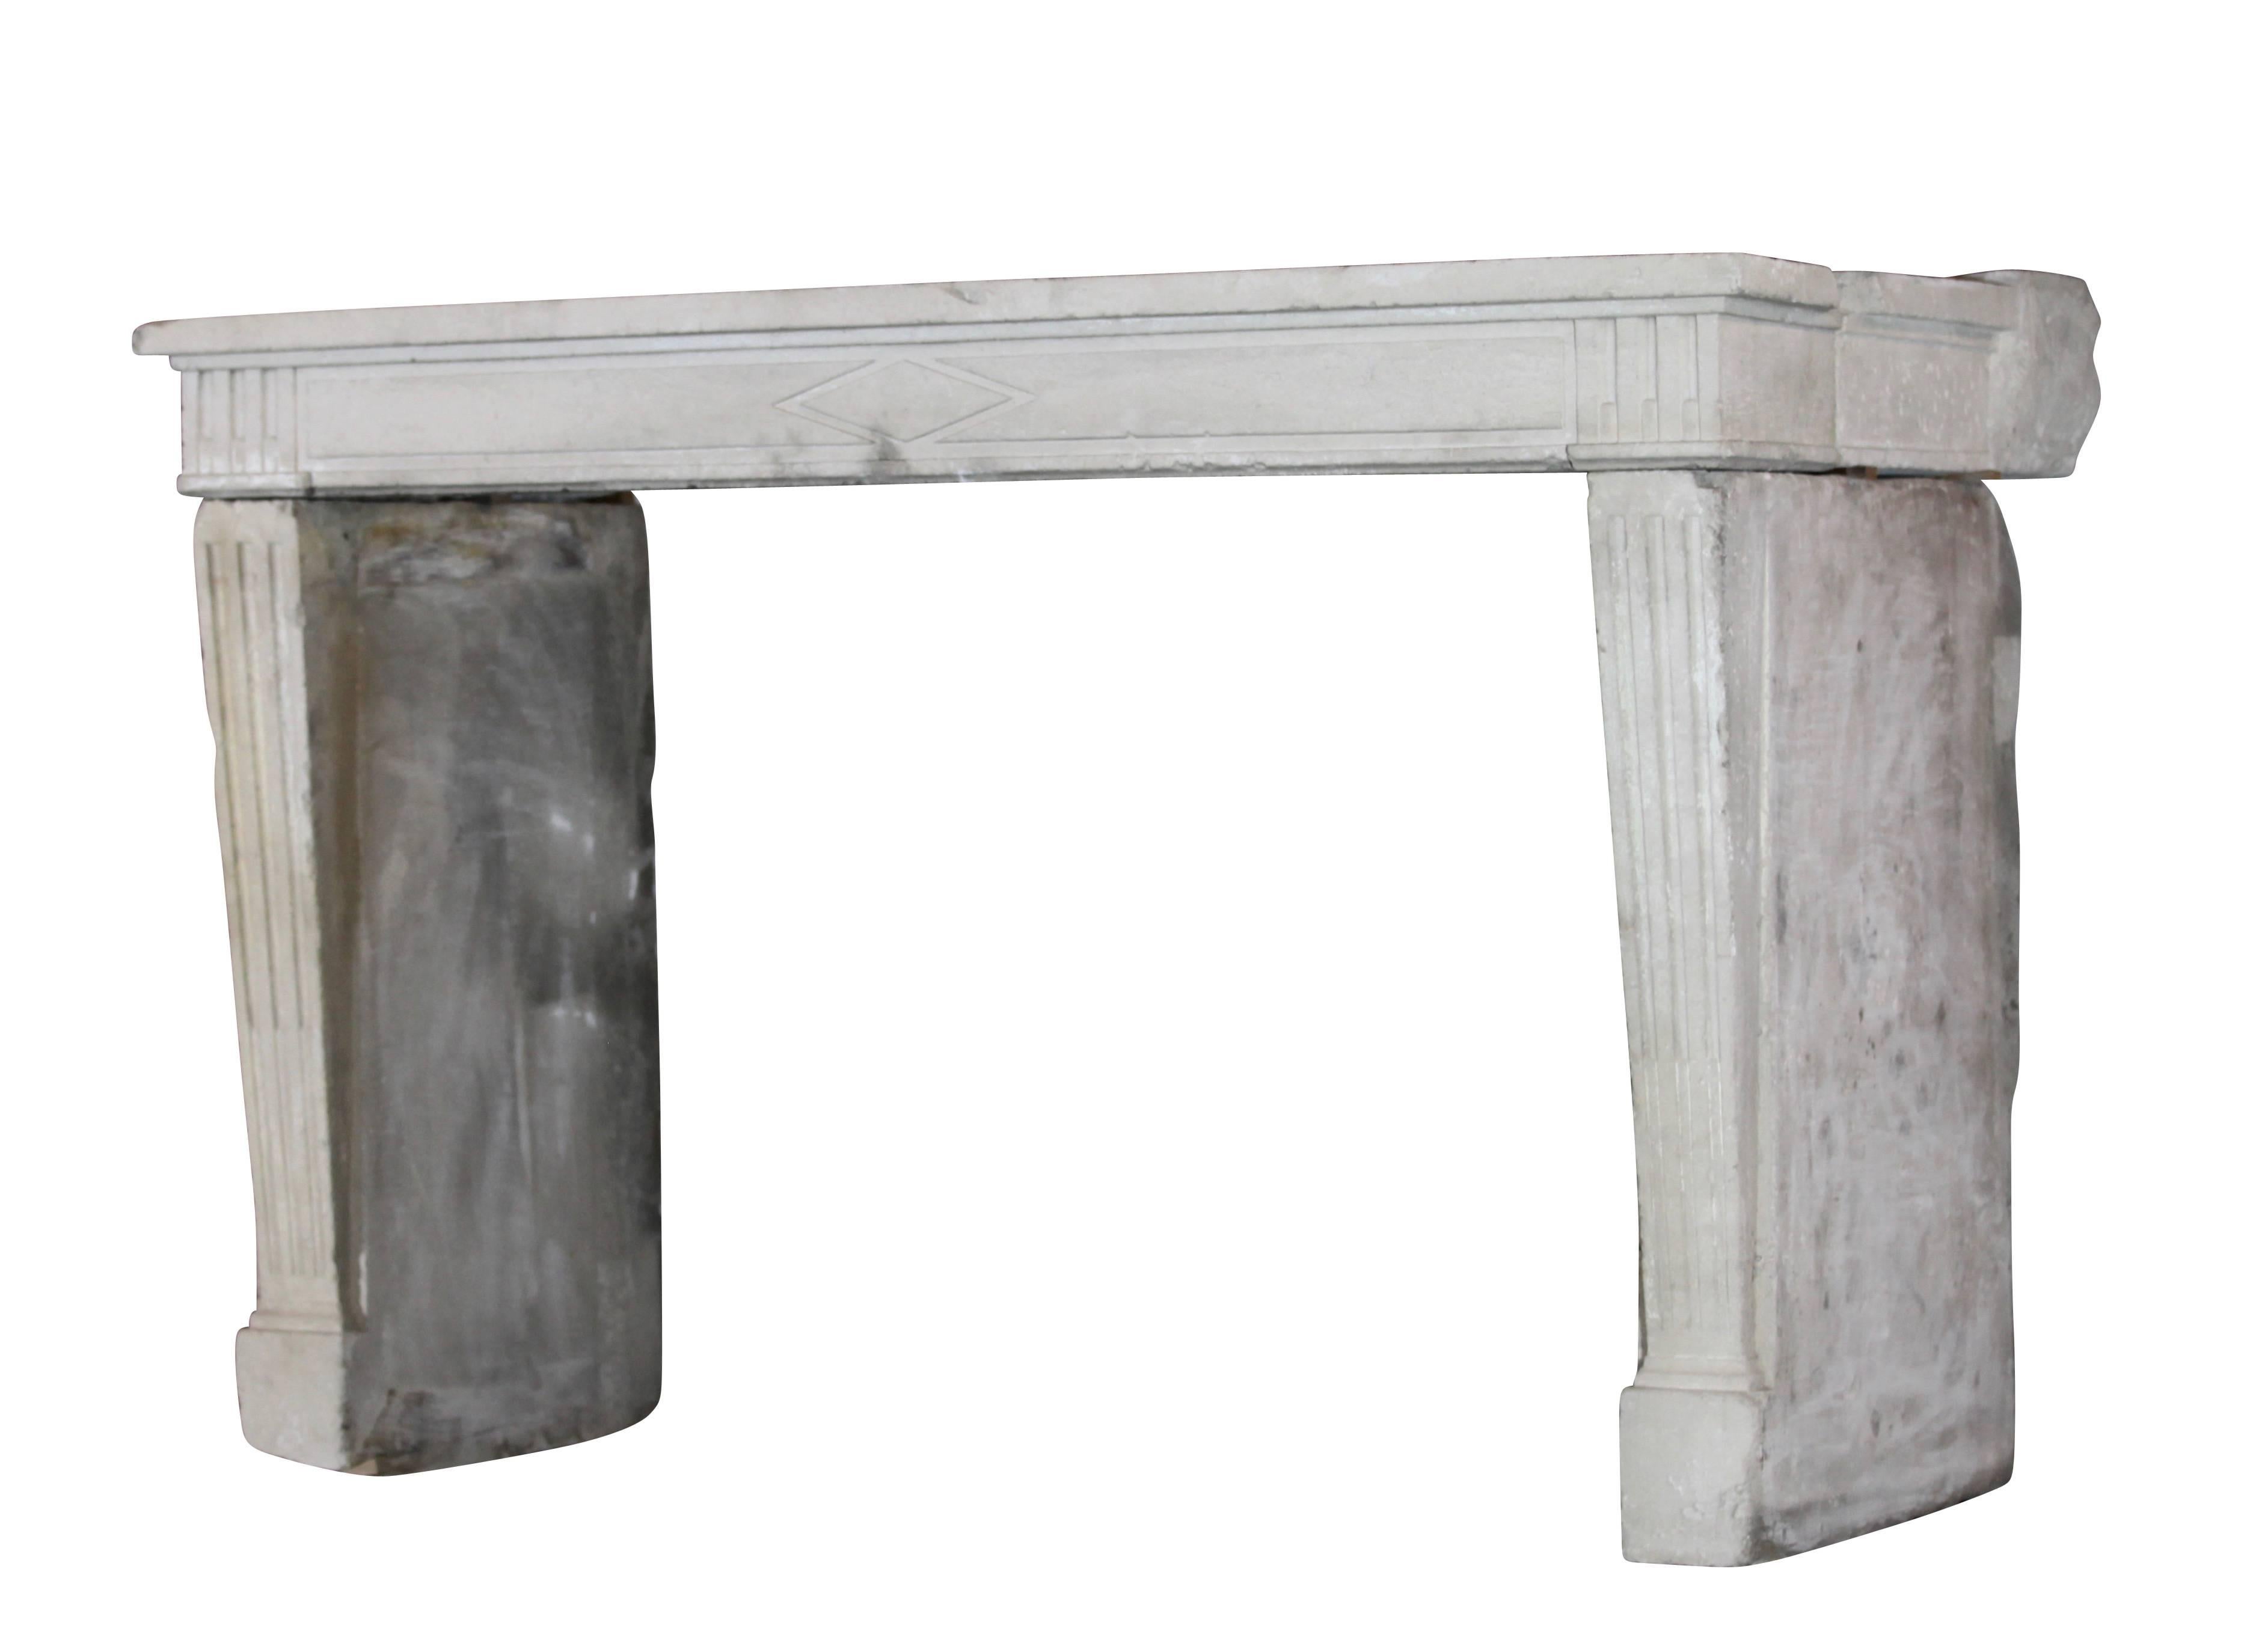 This country limestone surround has straight legs and has two side pieces. The leg are very deep. It can eventually been built around a smaller upper mantel.
Measures:
179 cm EW 70.47",
150 cm EW+ 59.05",
121 cm EH 47.63",
142 cm